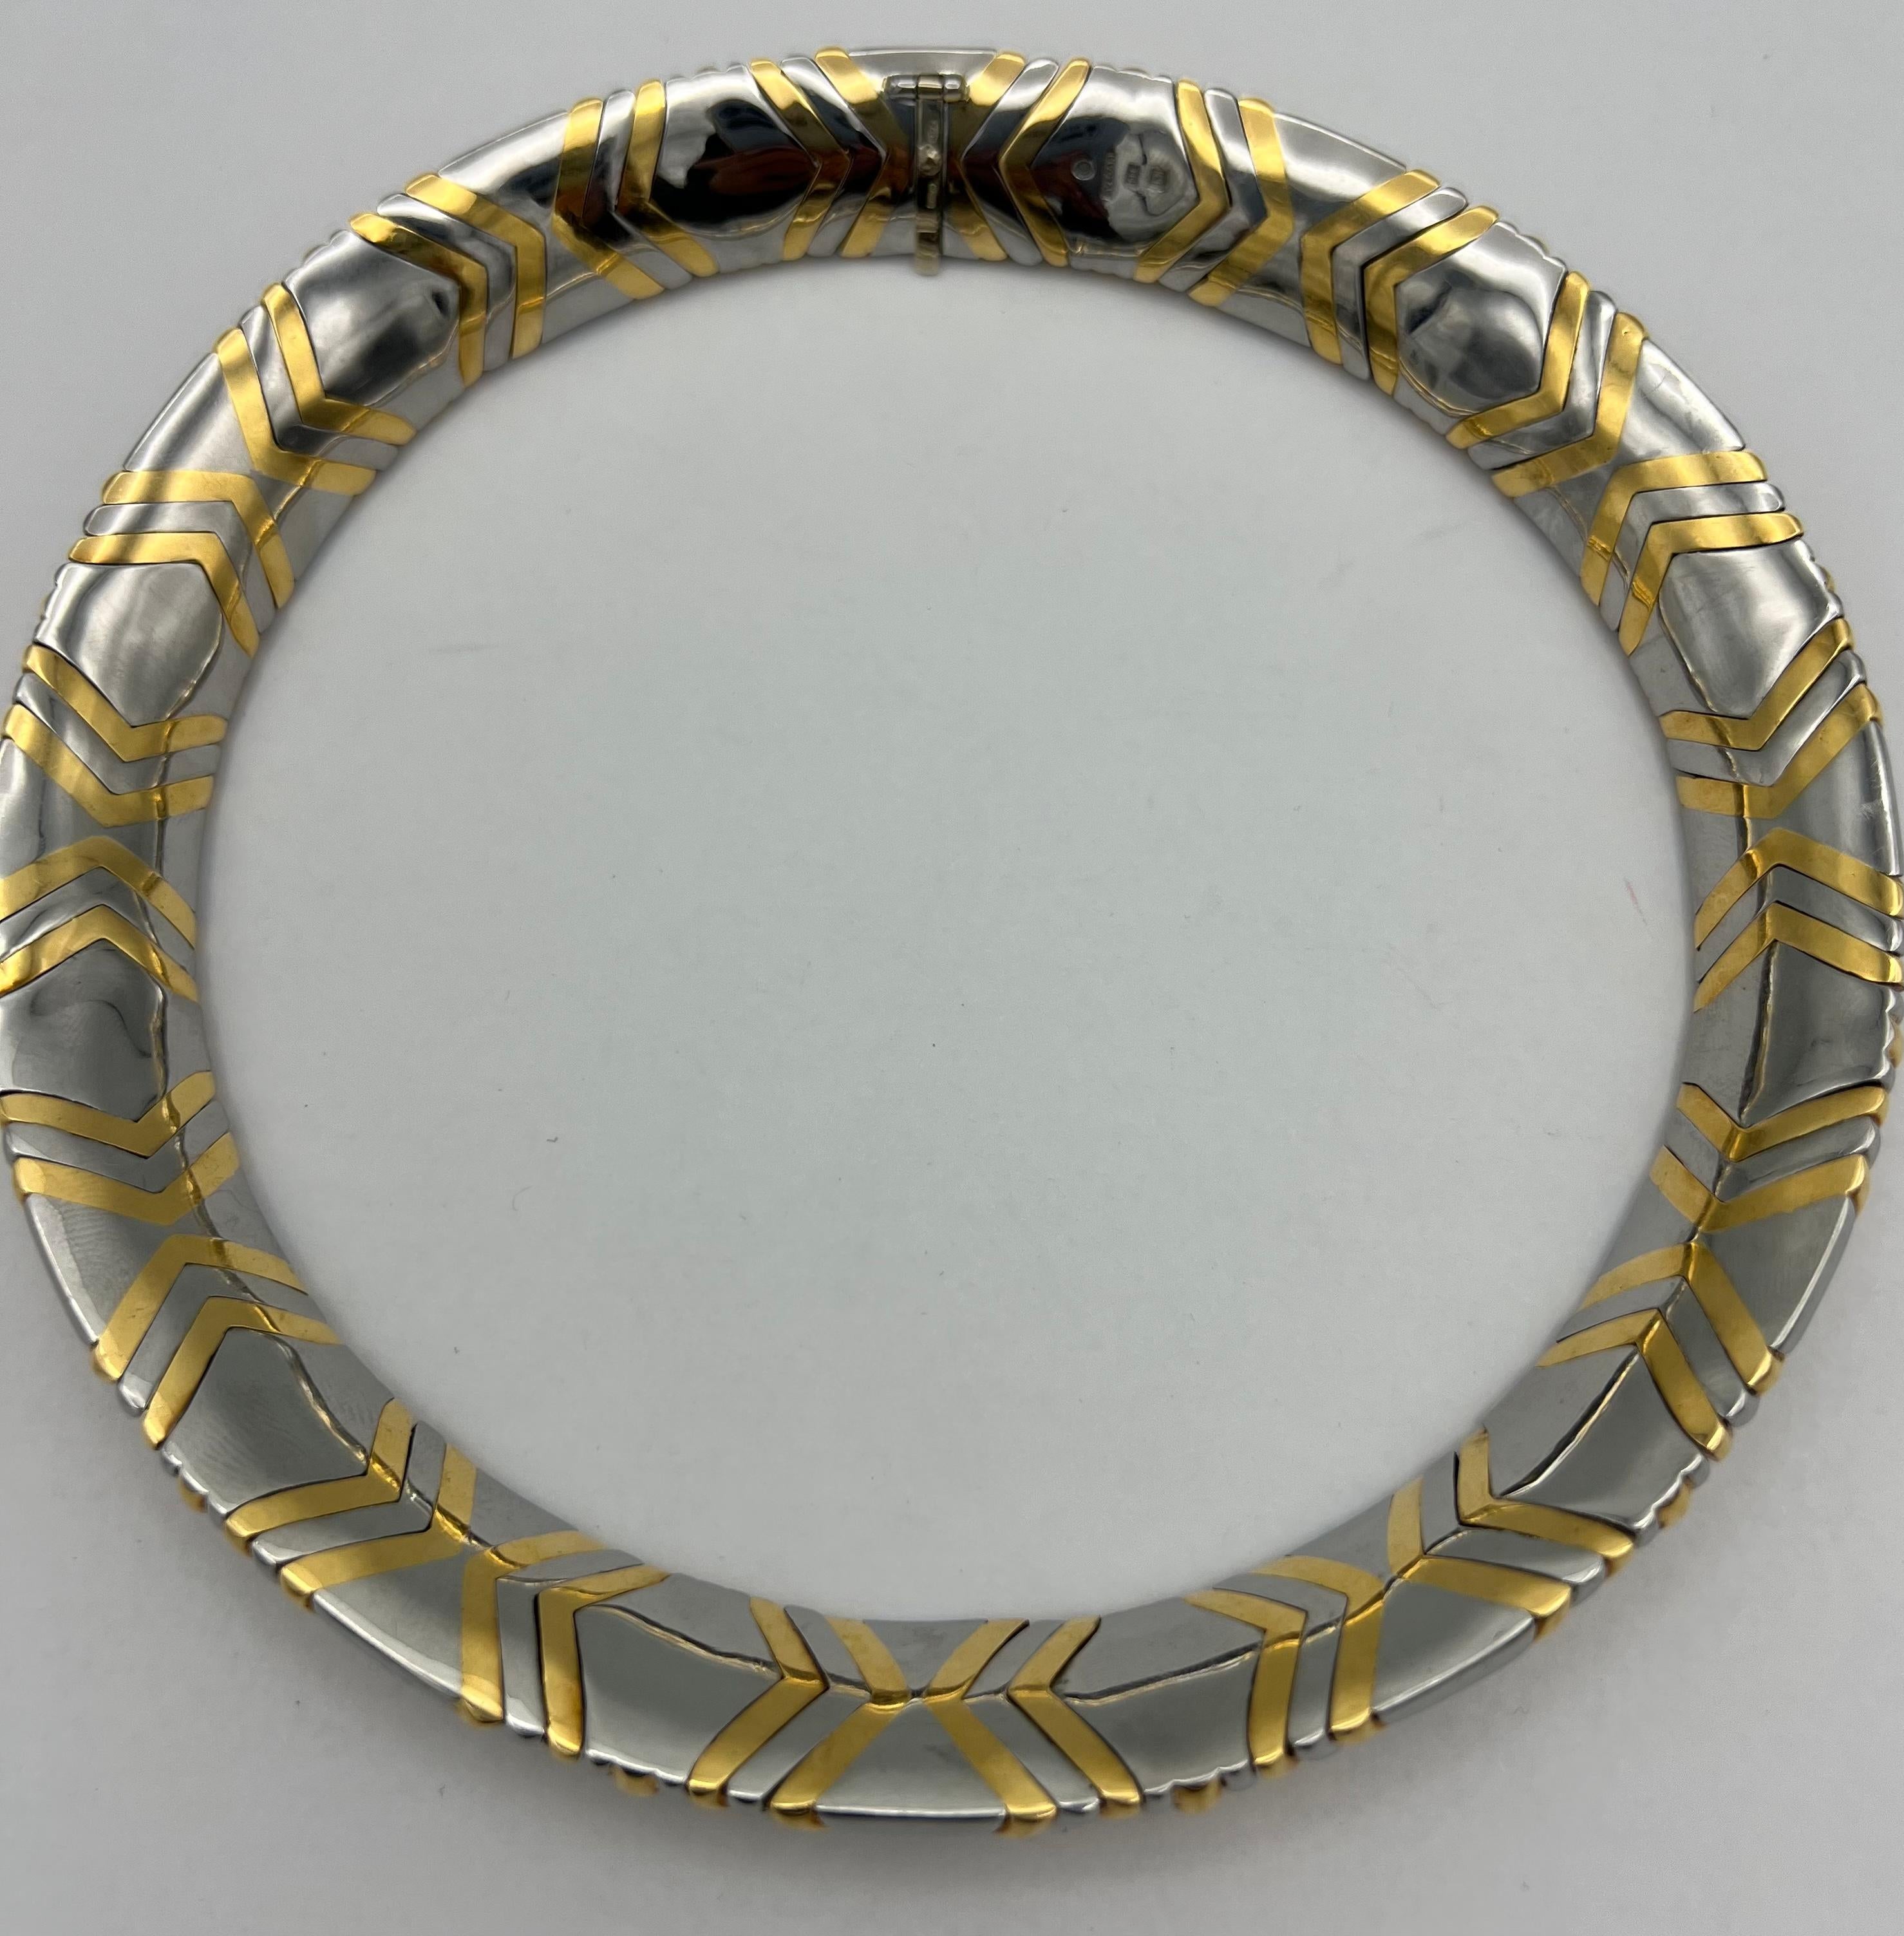 DESIGNER: Bulgari
CIRCA: 1980
MATERIALS: 18K Yellow Gold & Stainless Steel
WEIGHT: 162.7 grams
MEASUREMENTS: 14” x 7/8”
HALLMARKS: BVLGARI, 1988, 750
ITEM DETAILS:
A wide Bulgari Alveare necklace, made of gold and stainless steel. 

​The necklace